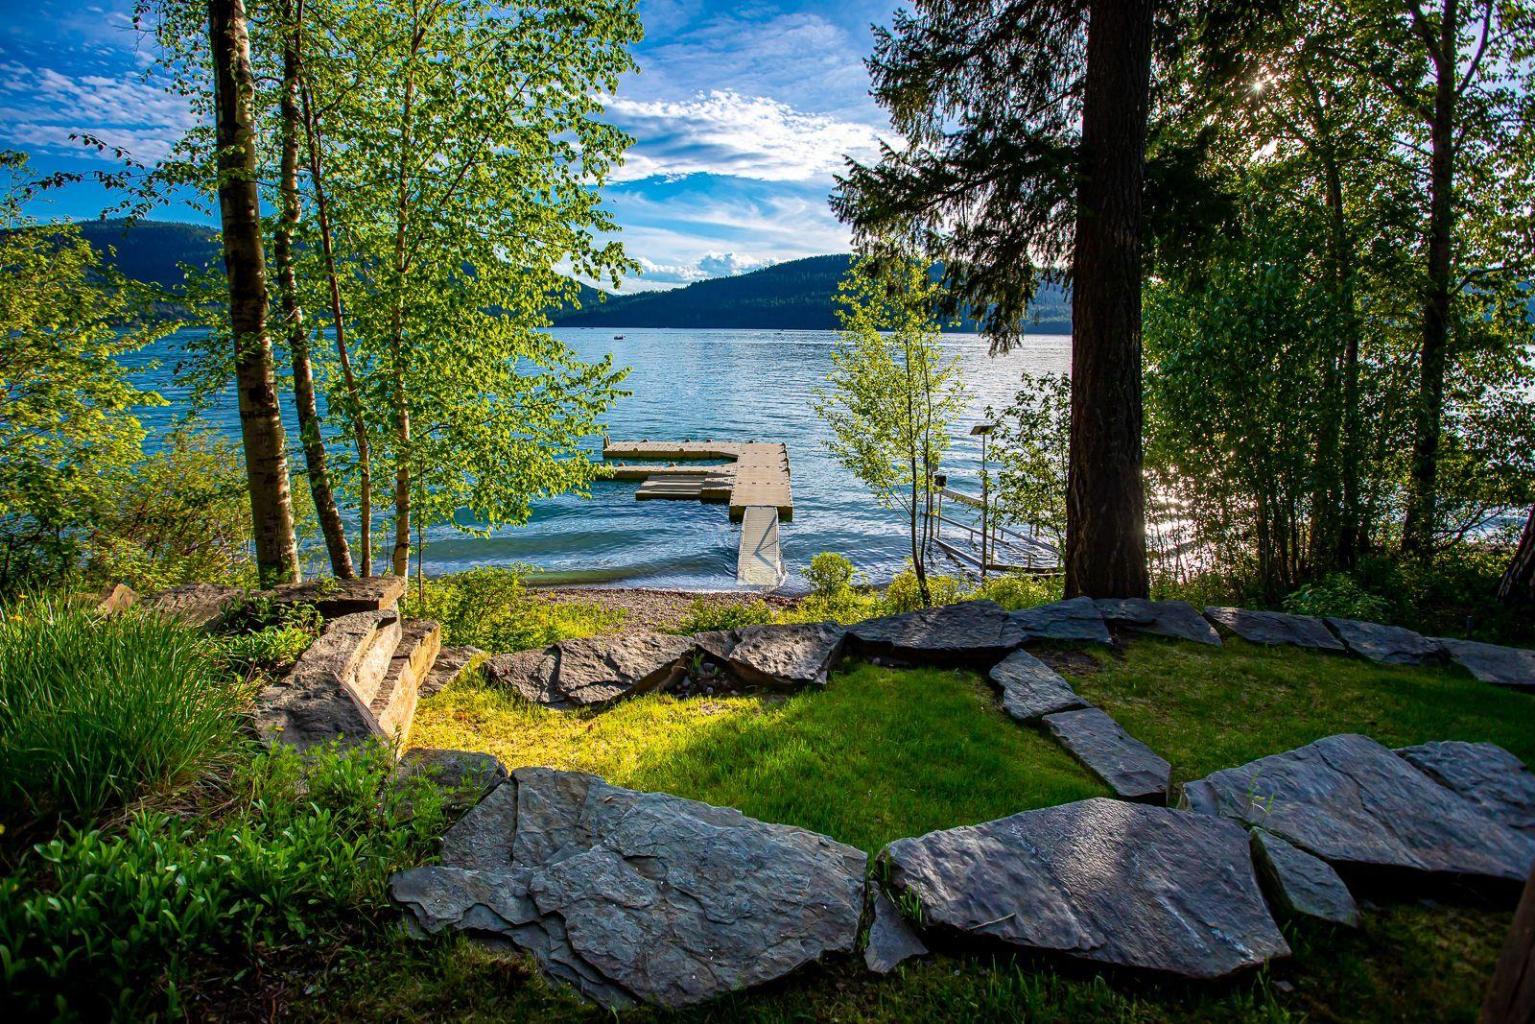 Lakefront property available. PureWest Christie's International Real Estate. – PureWest Lake Team